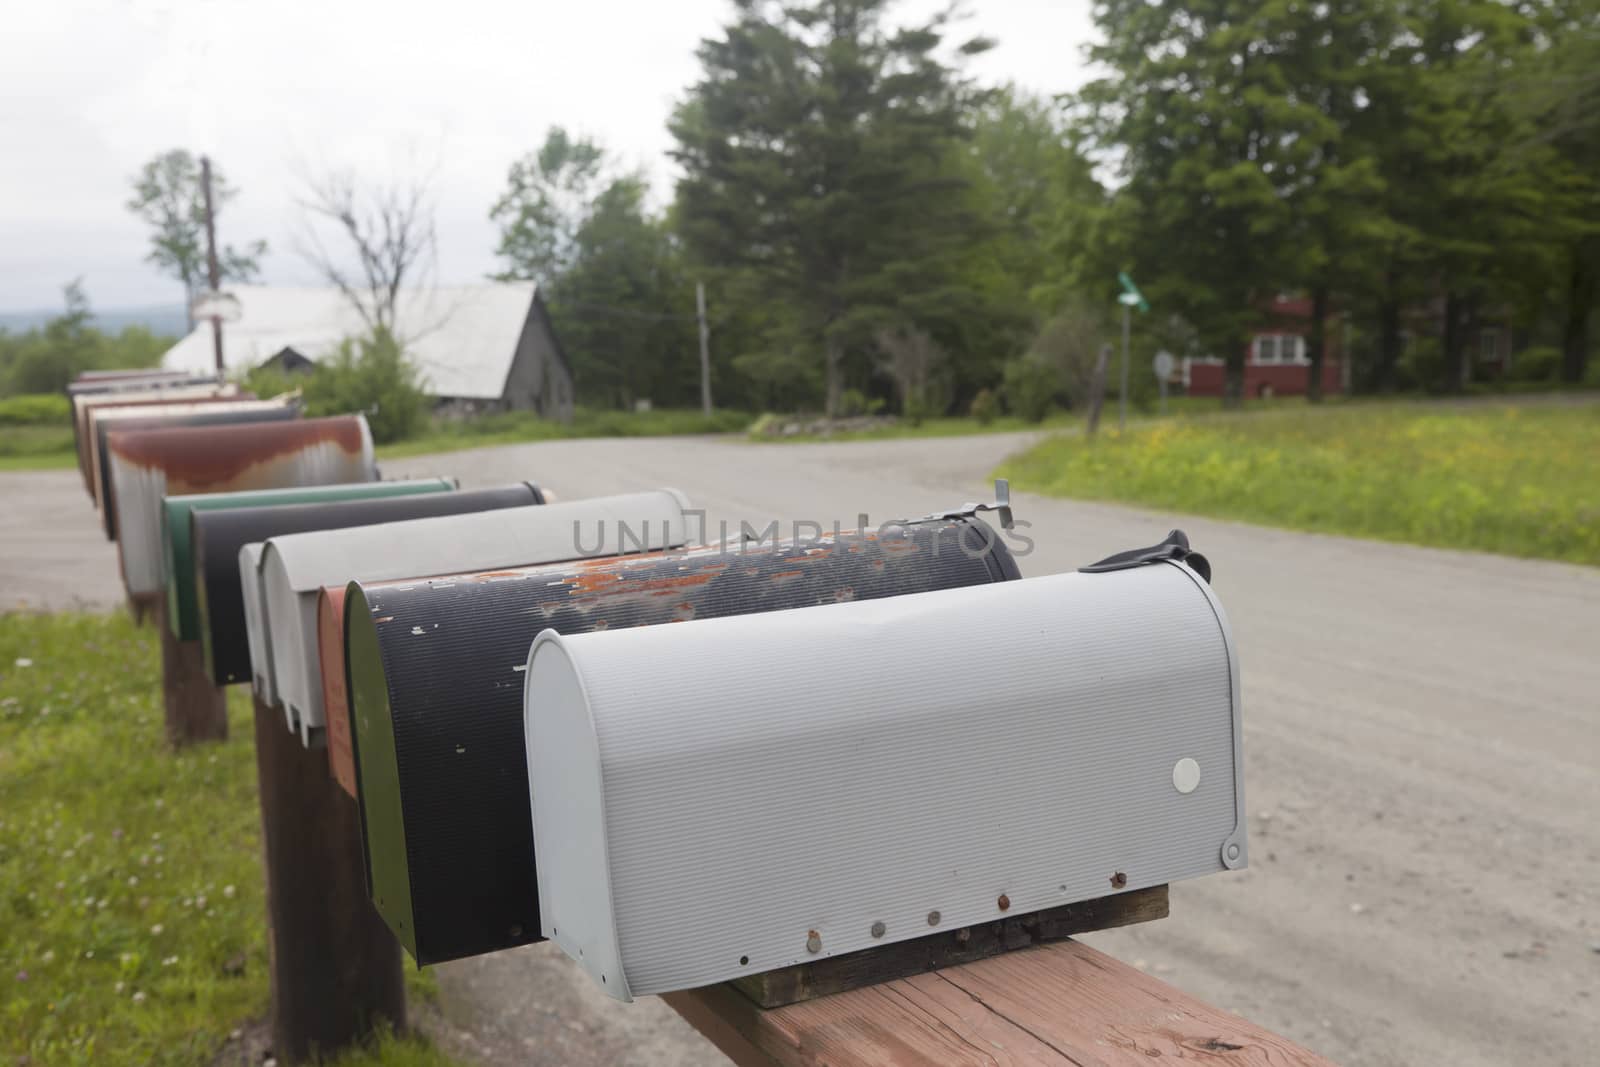 Rural Mailboxes by mothy20